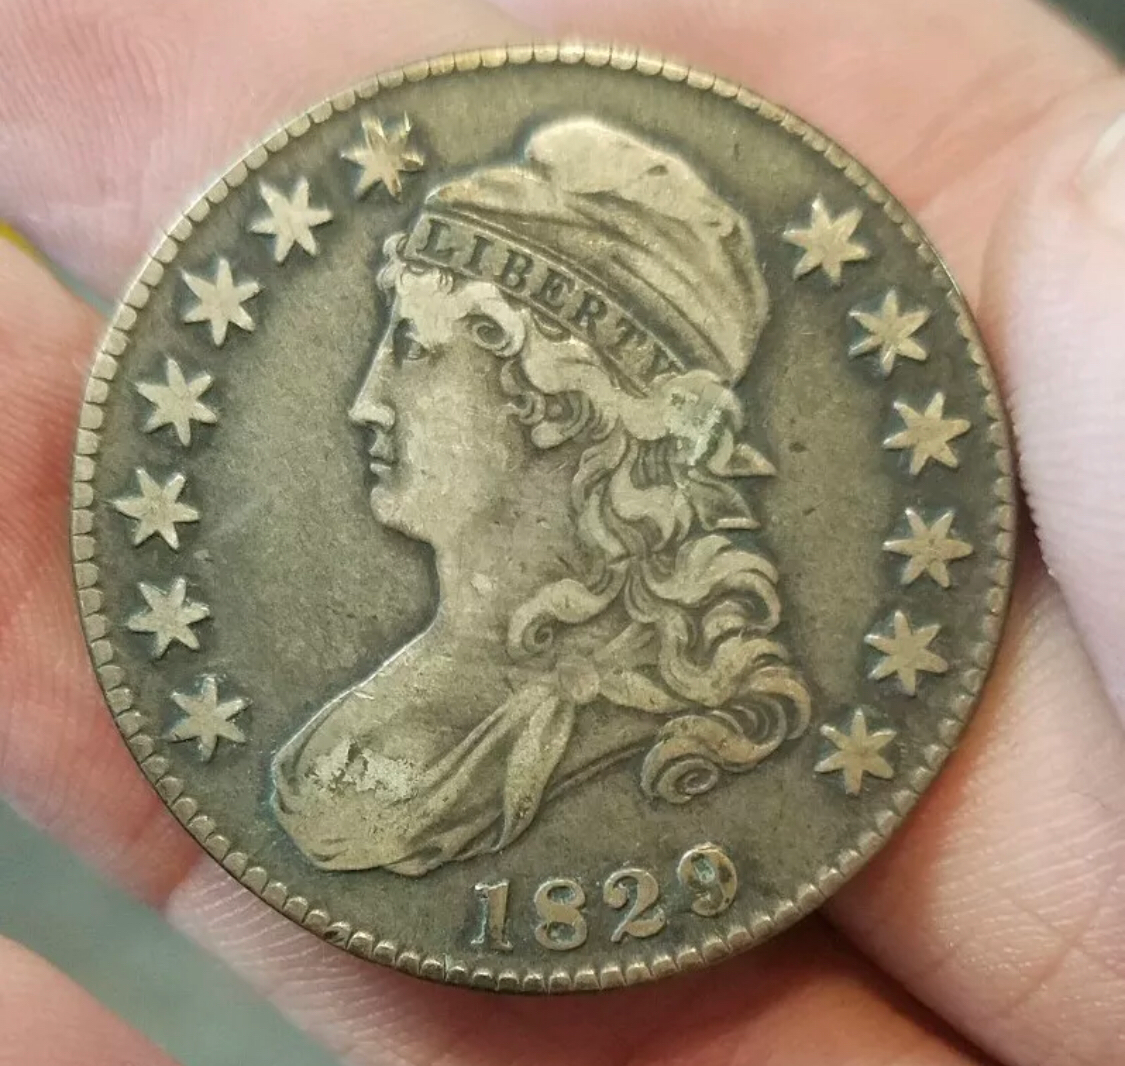 Old bust half dollar in circulated condition Collectors Coins & Jewelry Lynbrook (516)341-7355